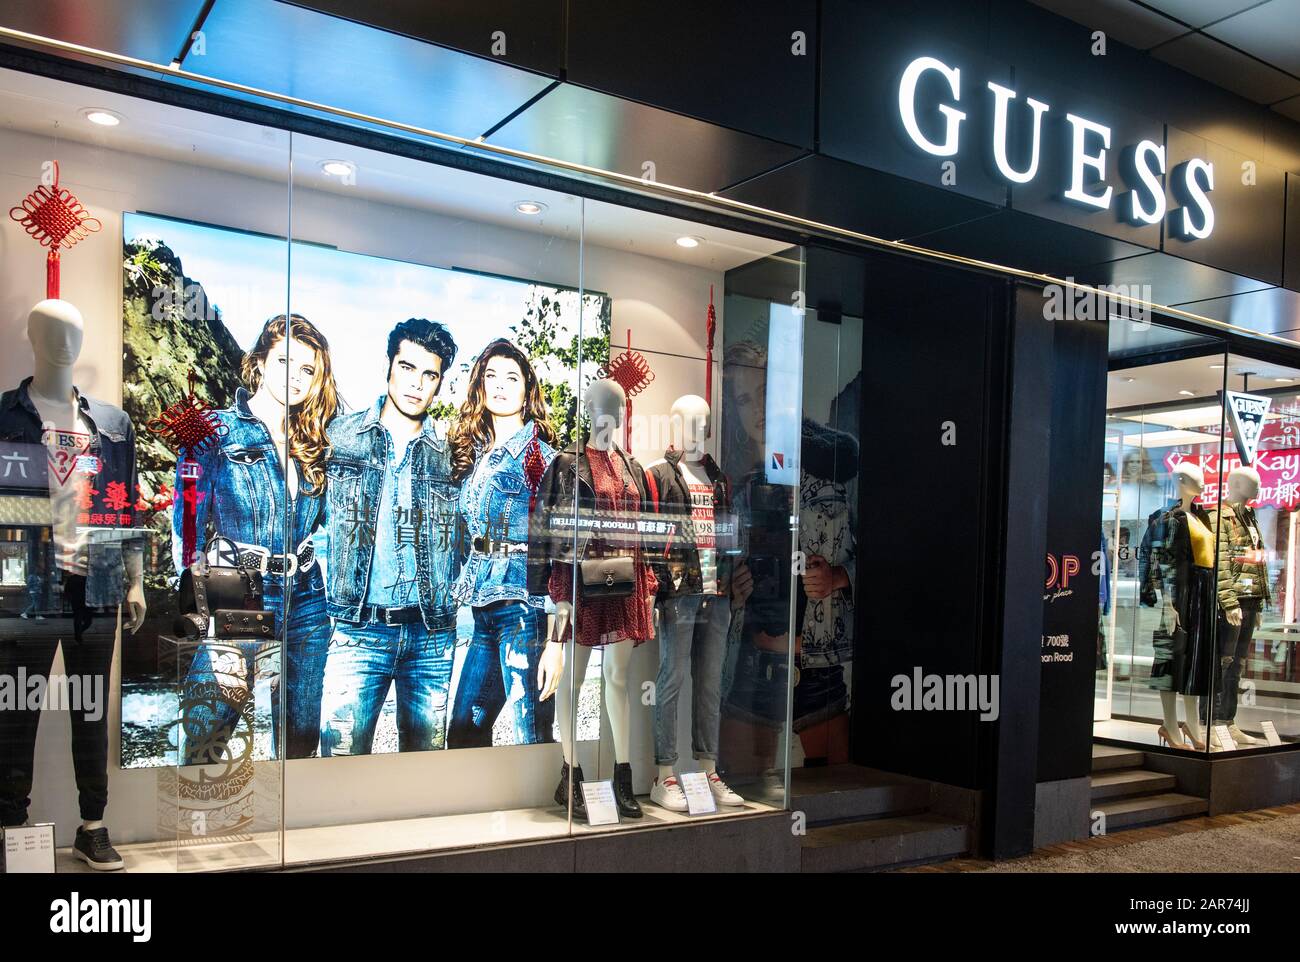 clothing stores like guess - OFF-64% > Shipping free